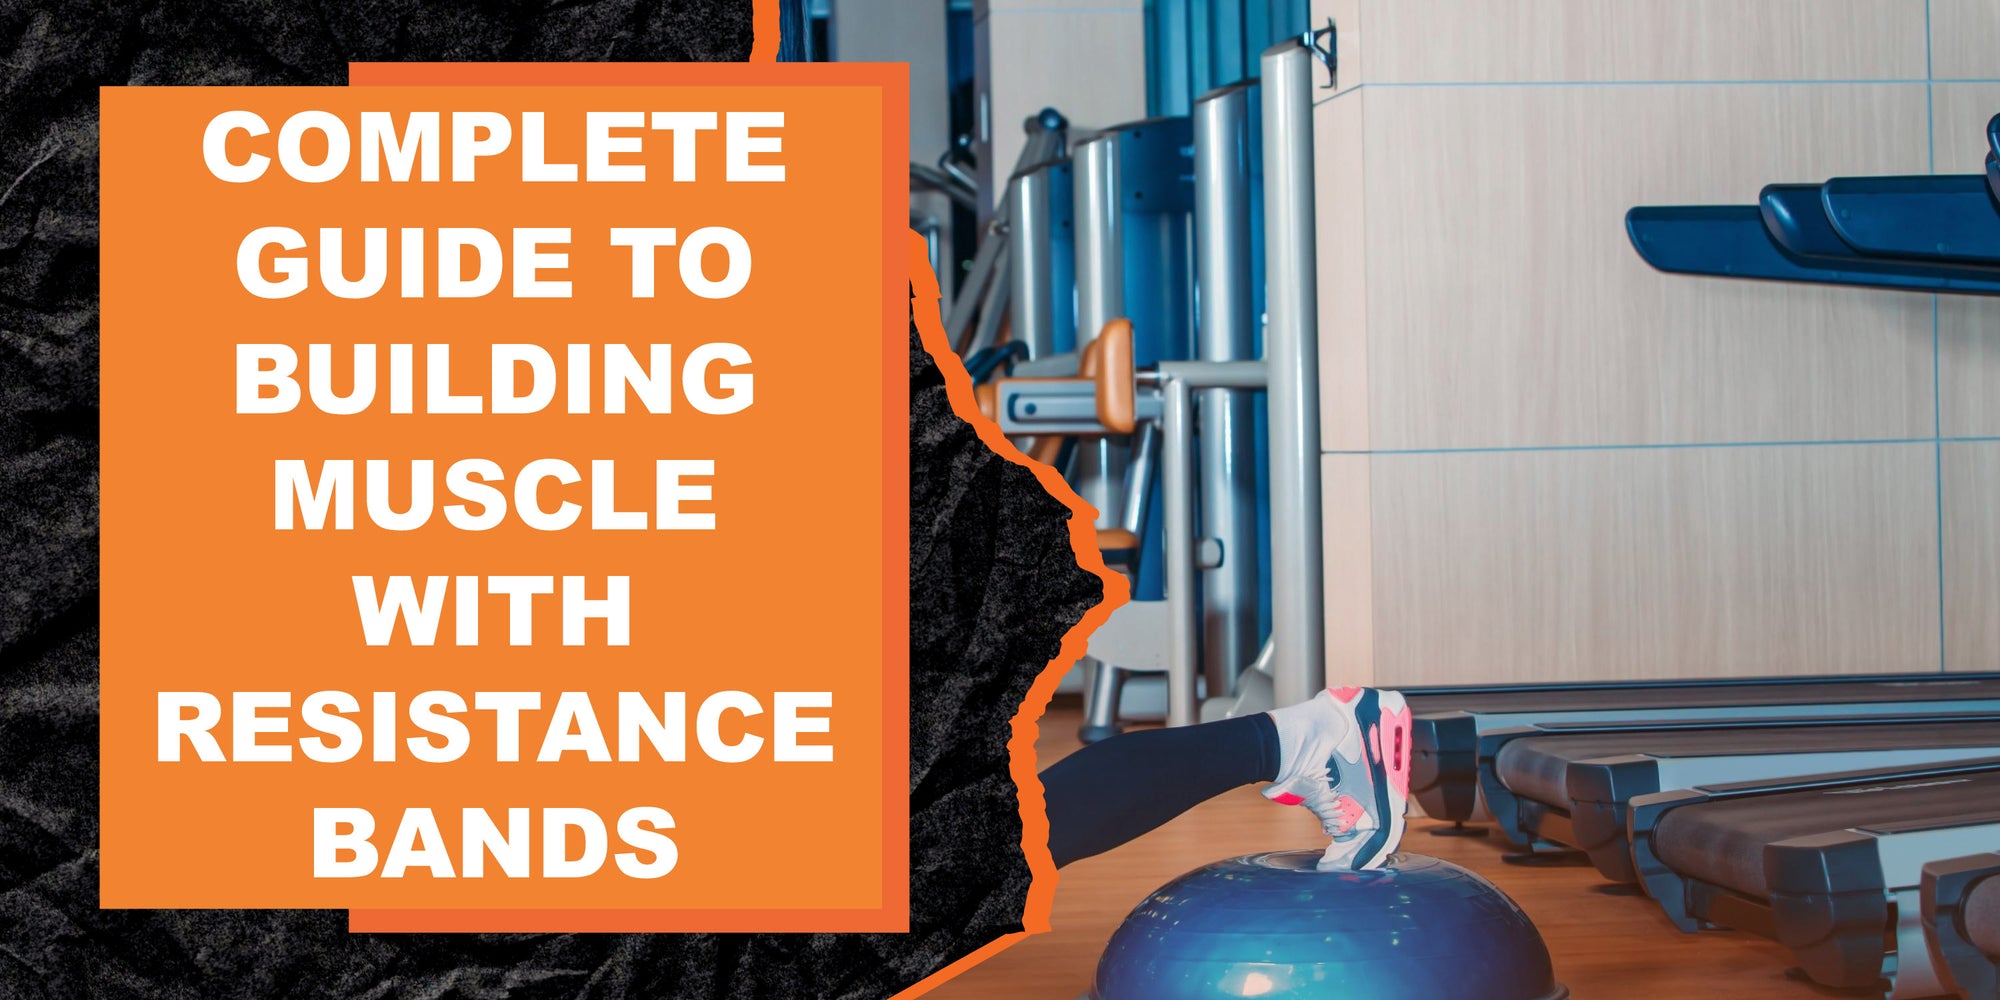 The Ultimate Guide to Building Muscle with Resistance Bands